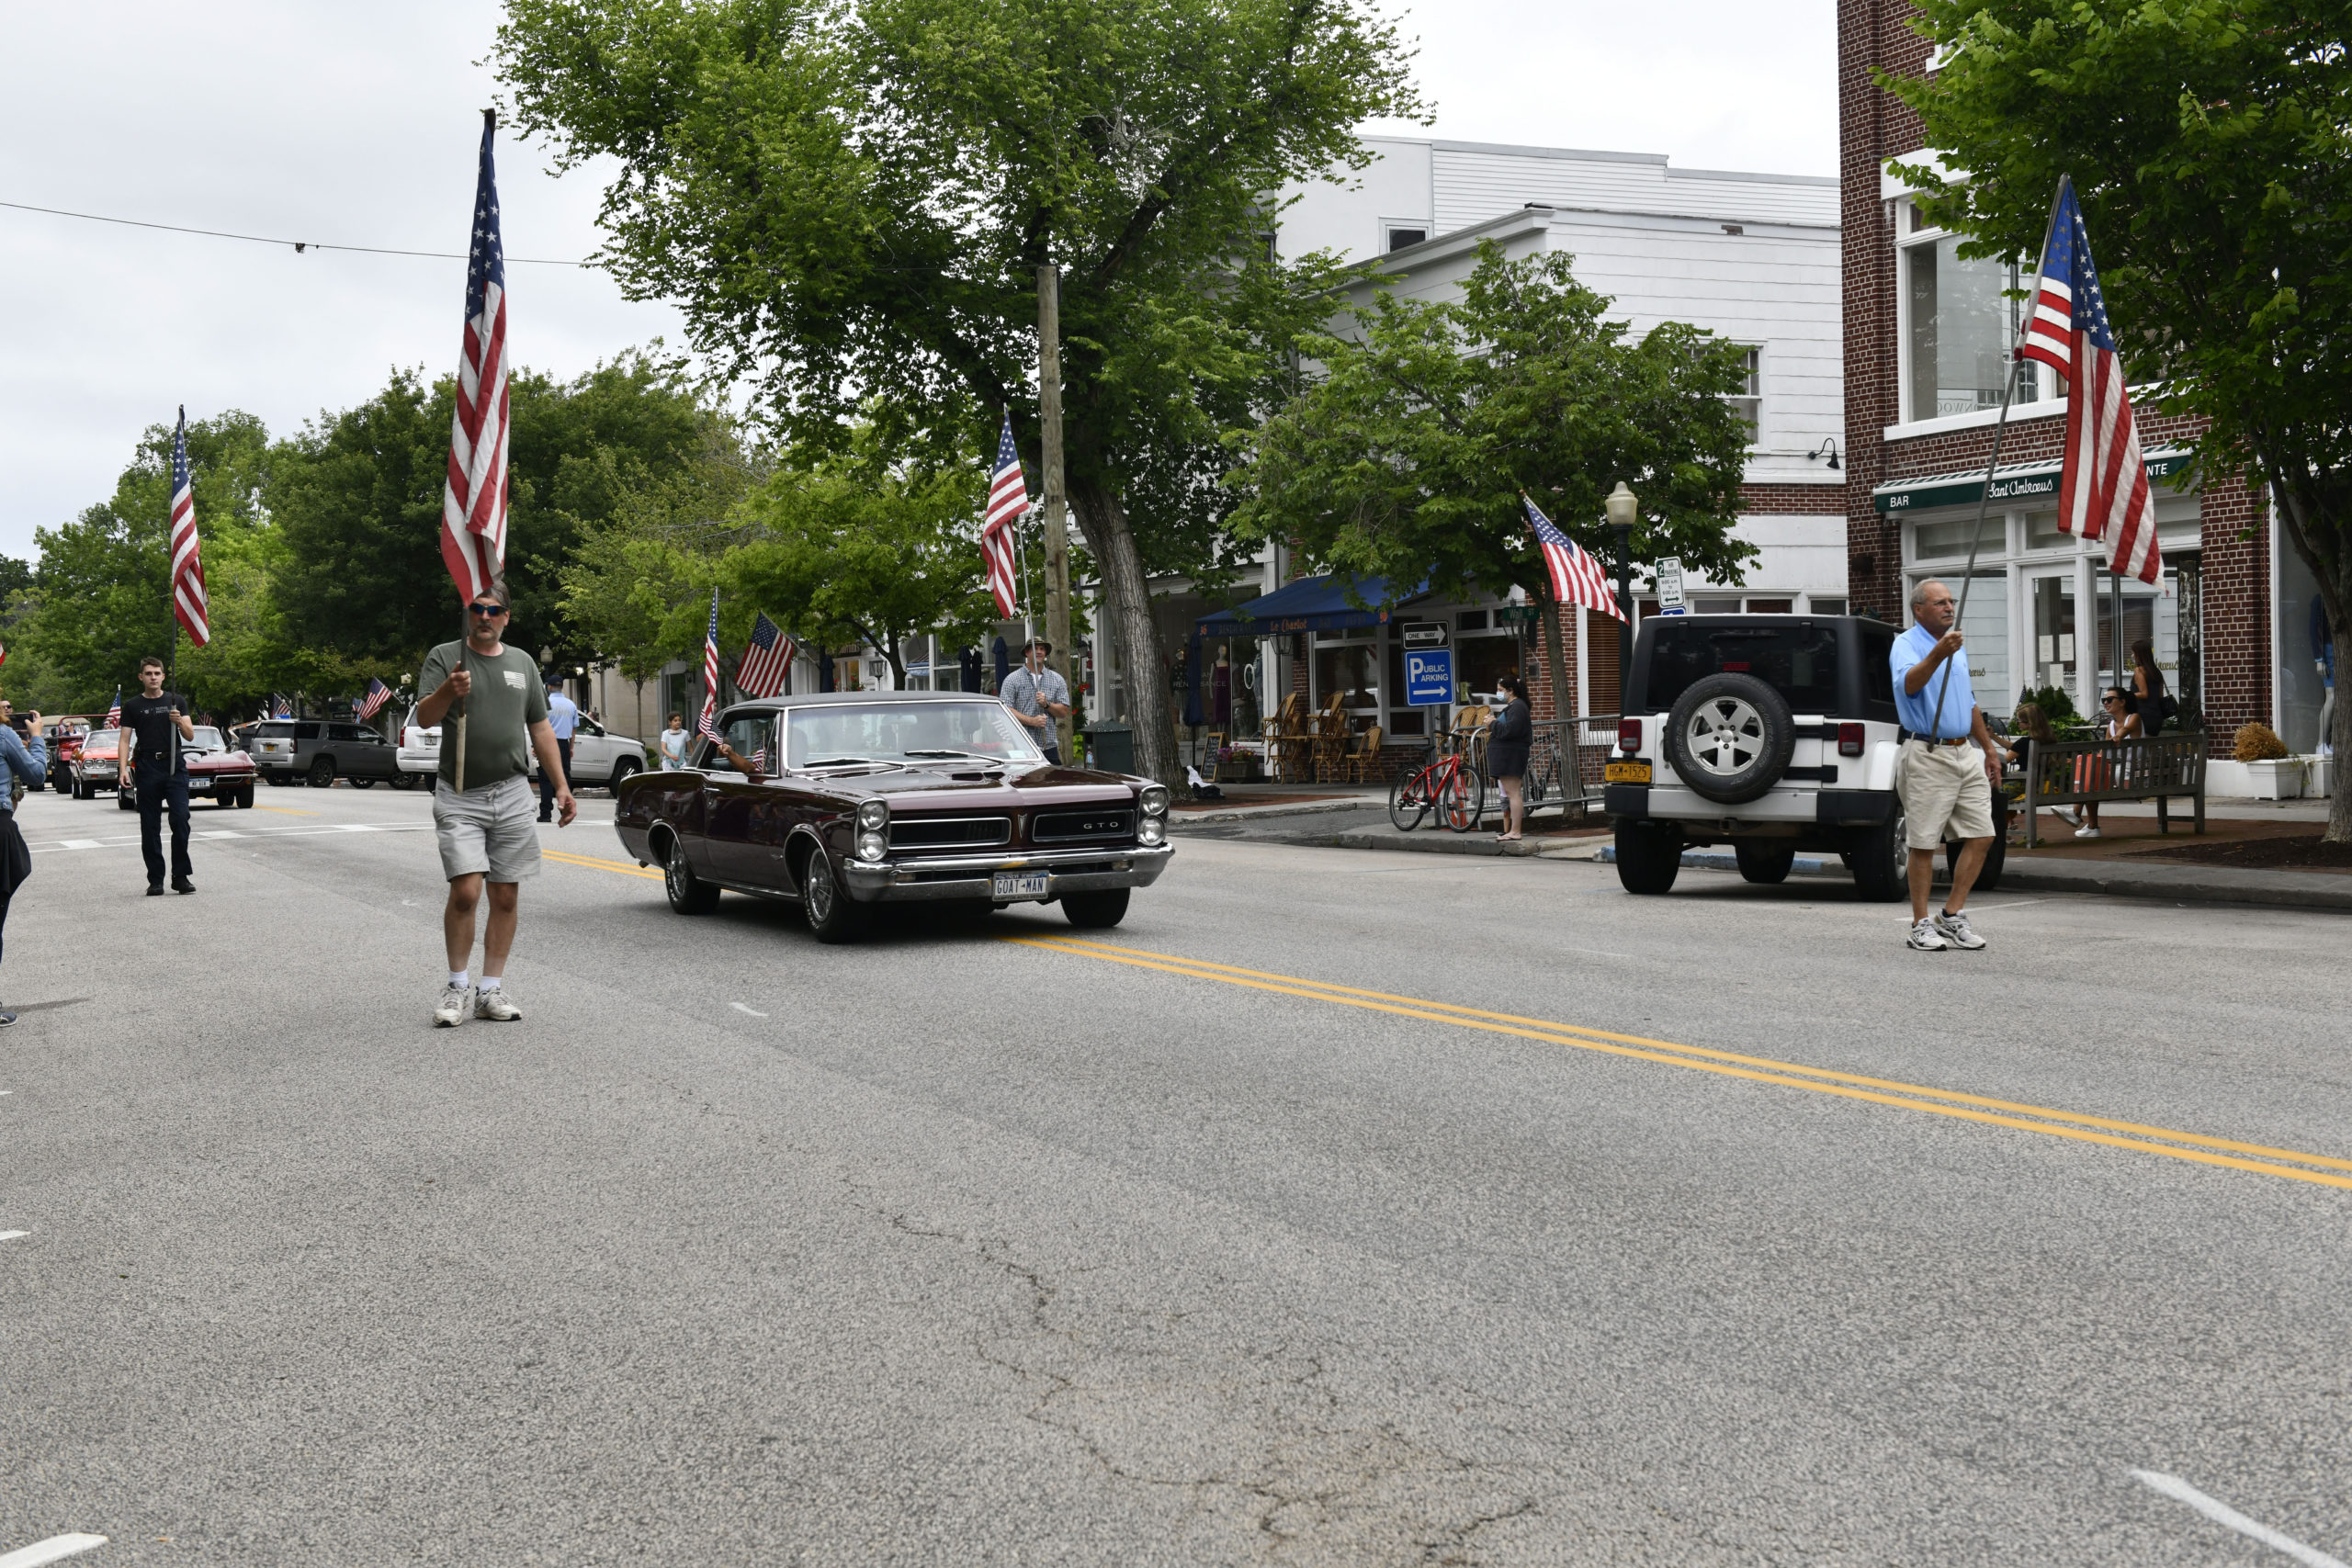 The parade in Southampton Village on Saturday morning.